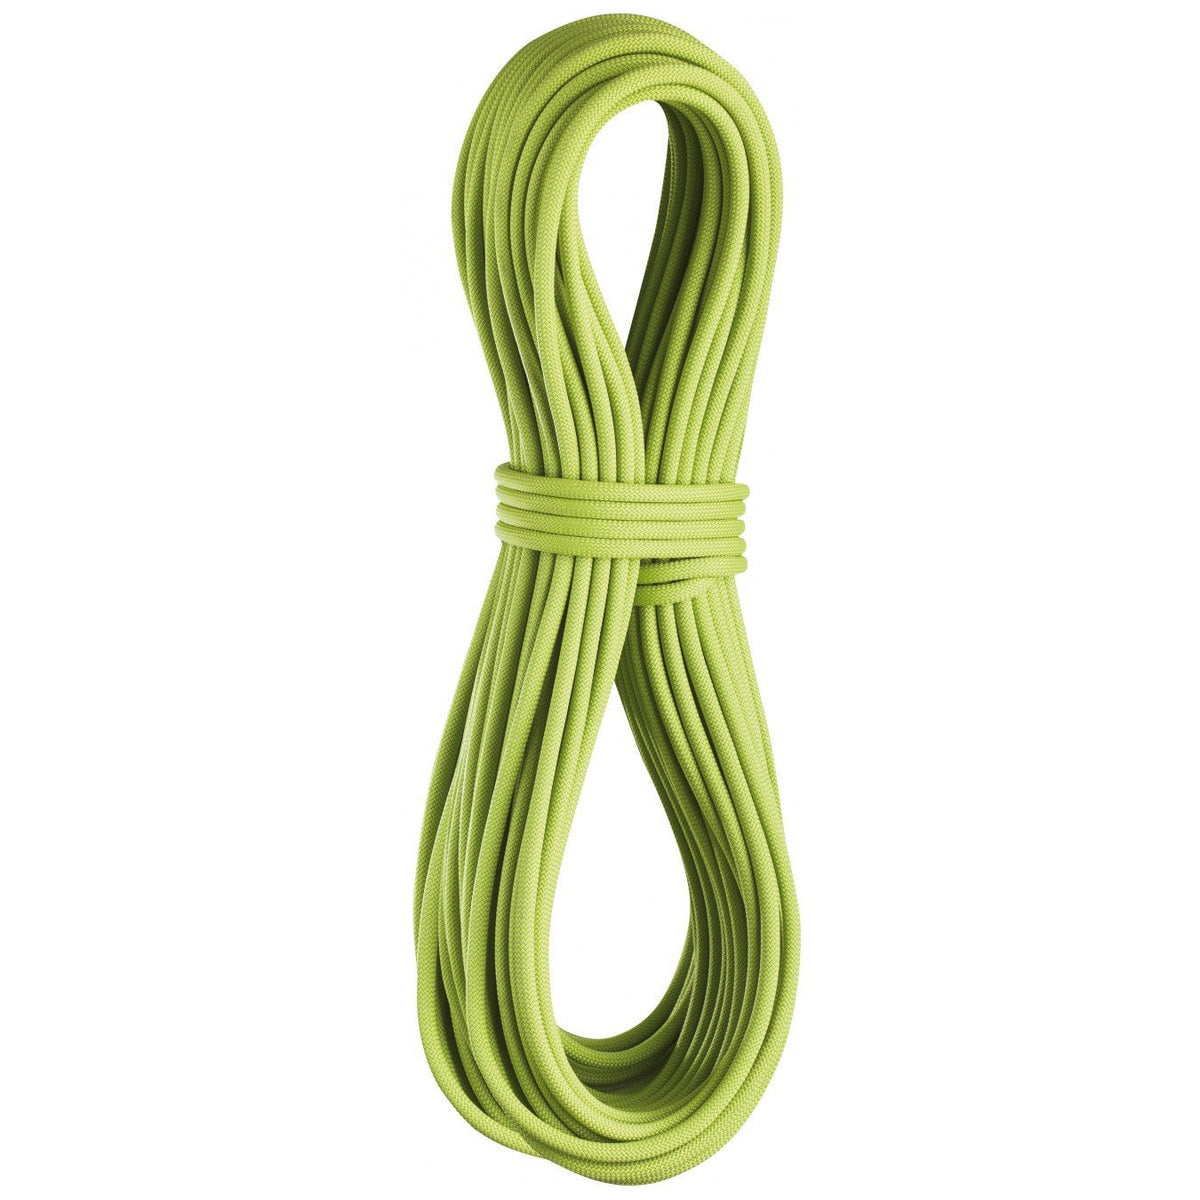 Edelrid Apus Pro Dry 7.9mm x 60m climbing rope, in green colour